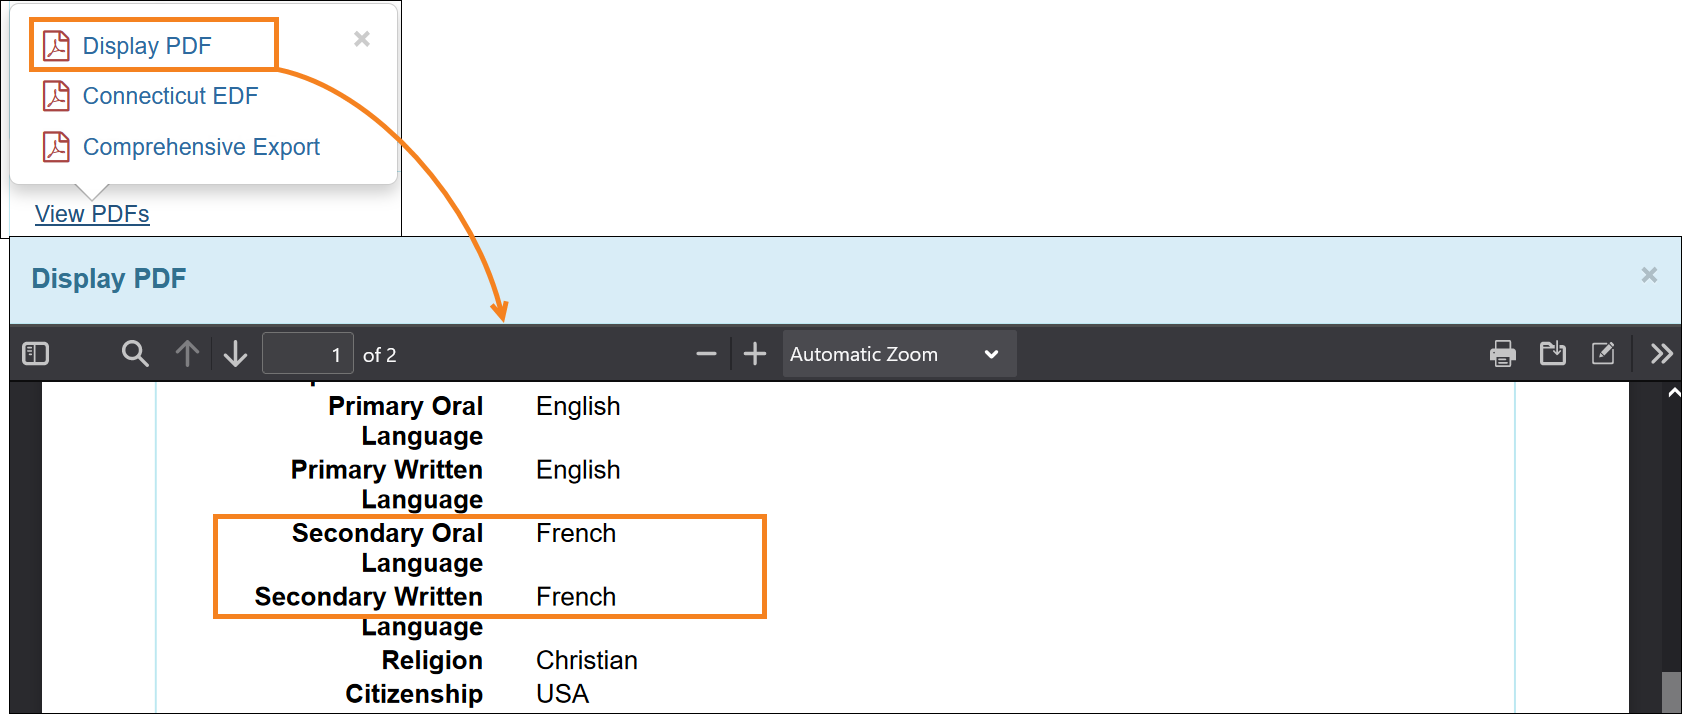 Screenshot of the Secondary Oral Language and Secondary Written Language fields on the Display Pdf windoe accessed using the Display PDF link